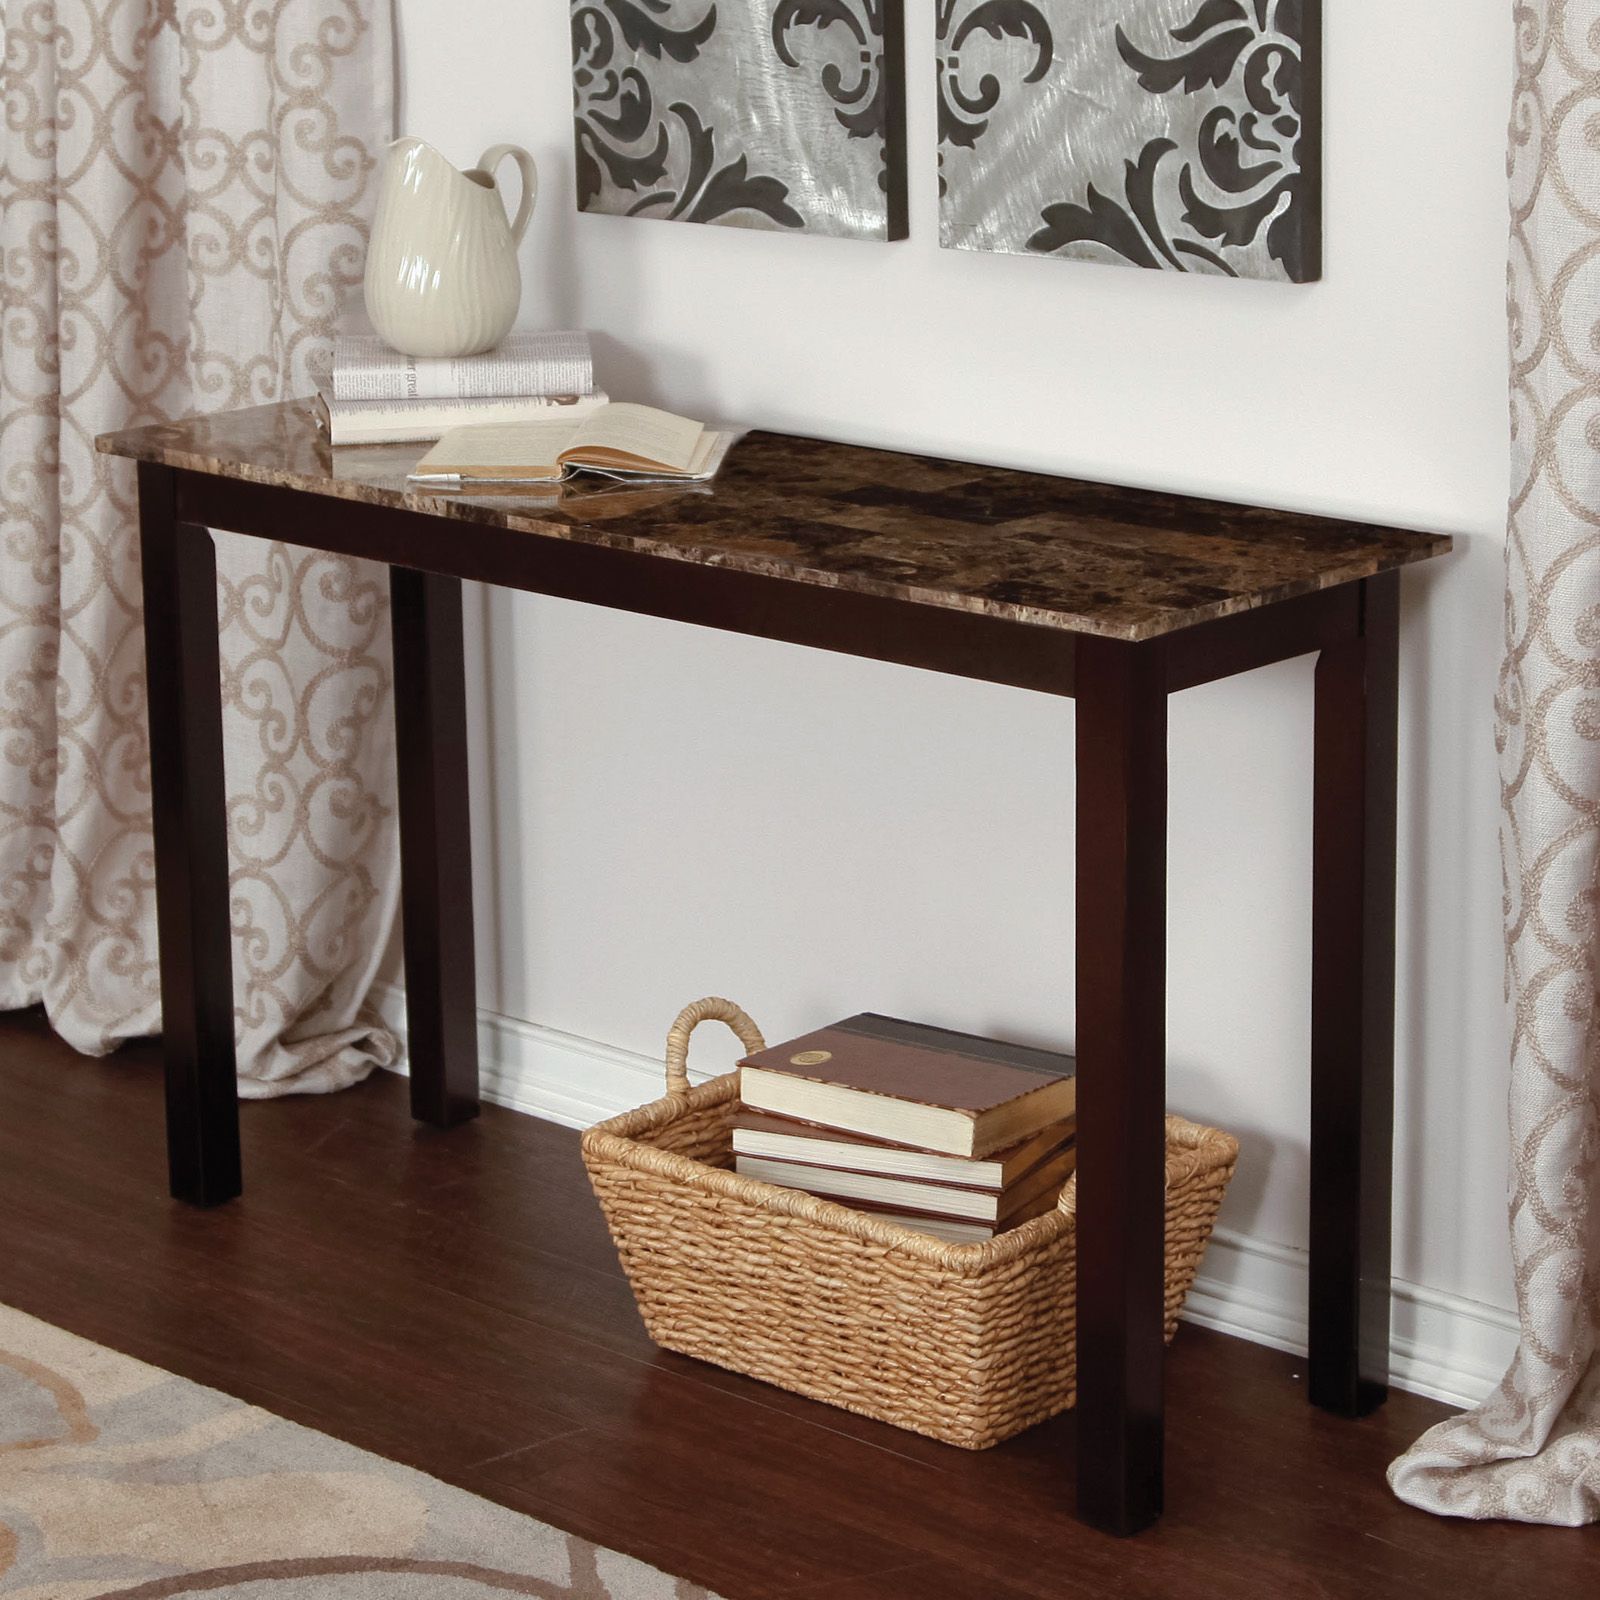 Palazzo Faux Marble Console Table – Console Tables At Hayneedle With Marble Console Tables (View 5 of 20)